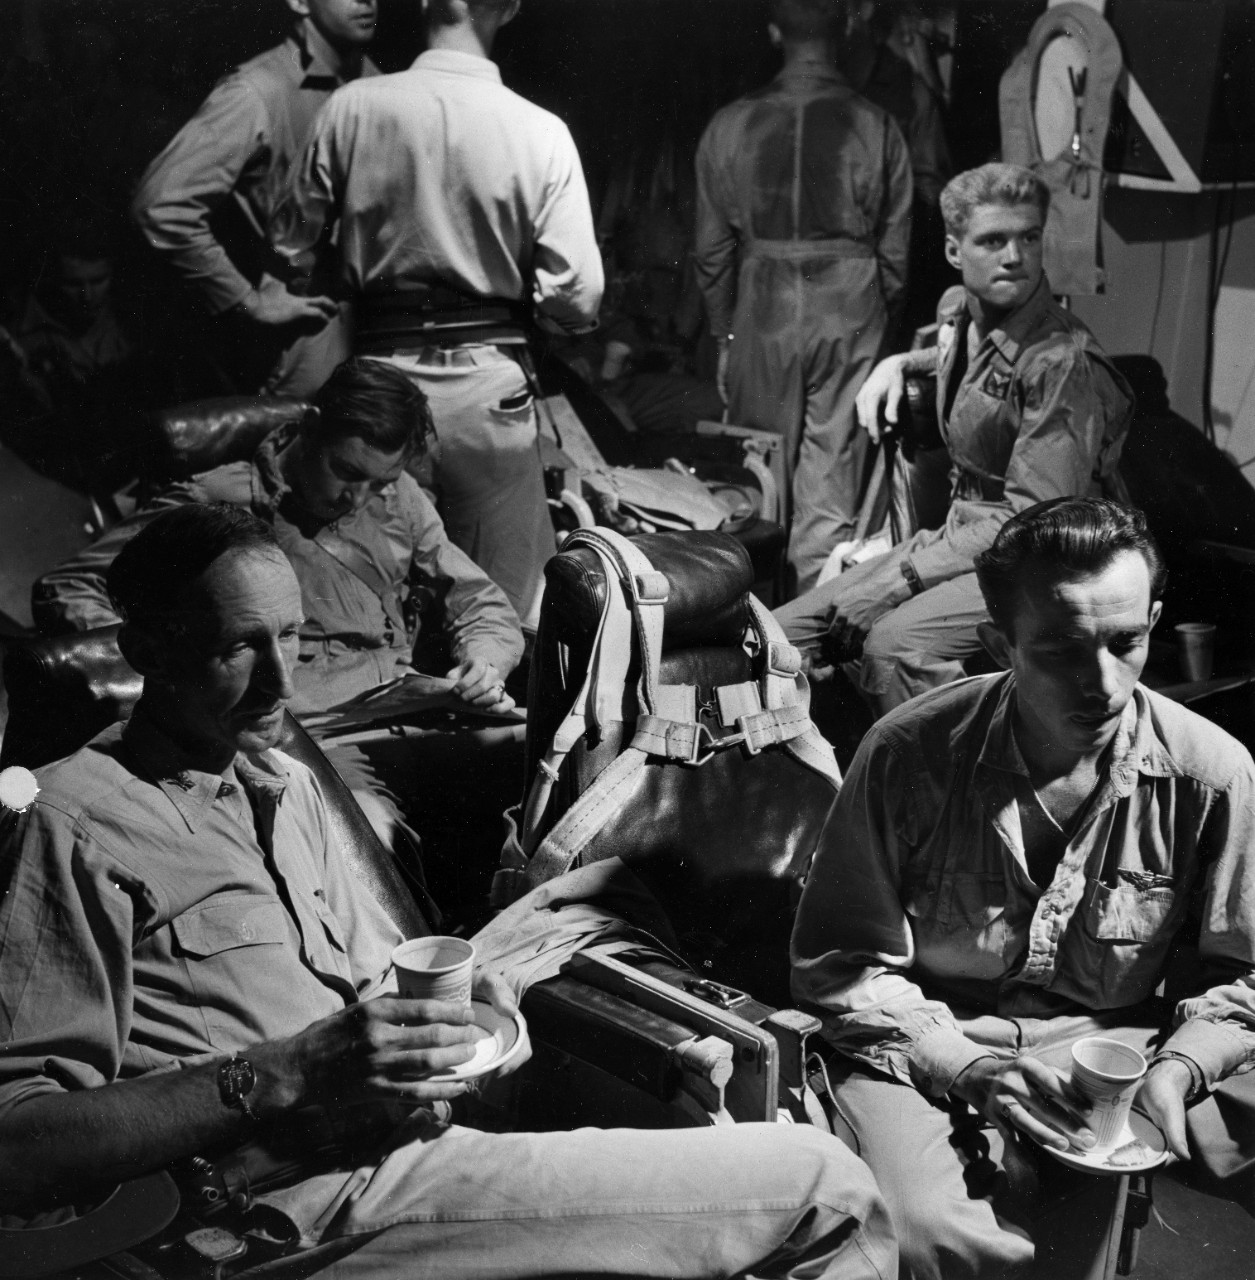 Tense scene in the pilots ready room of USS Monterey (CVL-26) as word is awaited from bombers about to attack Tinian, on 11 June 1944. Present are several fighter pilots who have just returned from an earlier strike on Gurguan Airfield, including ship's Air Group Commander, LCDR. Roger Mehle (seated, right front). With LCDR Mehle is the ship's CO, CAPT. Stuart H Ingersoll. 